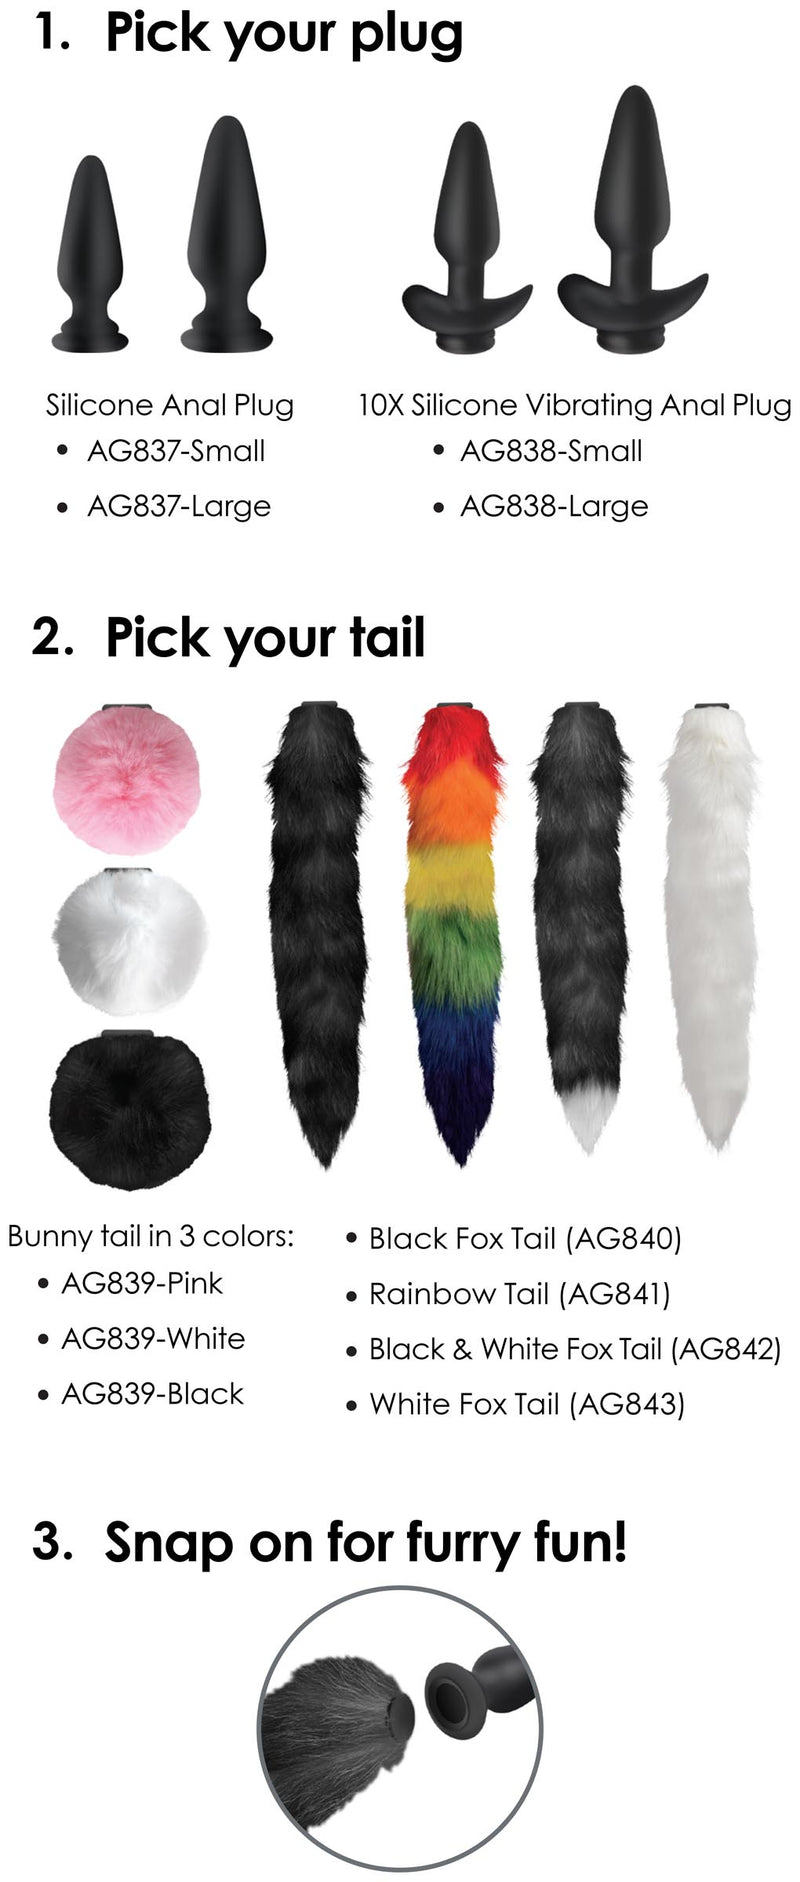 Large Anal Plug with Interchangeable Fox Tail - Black and White butt-plugs from Tailz